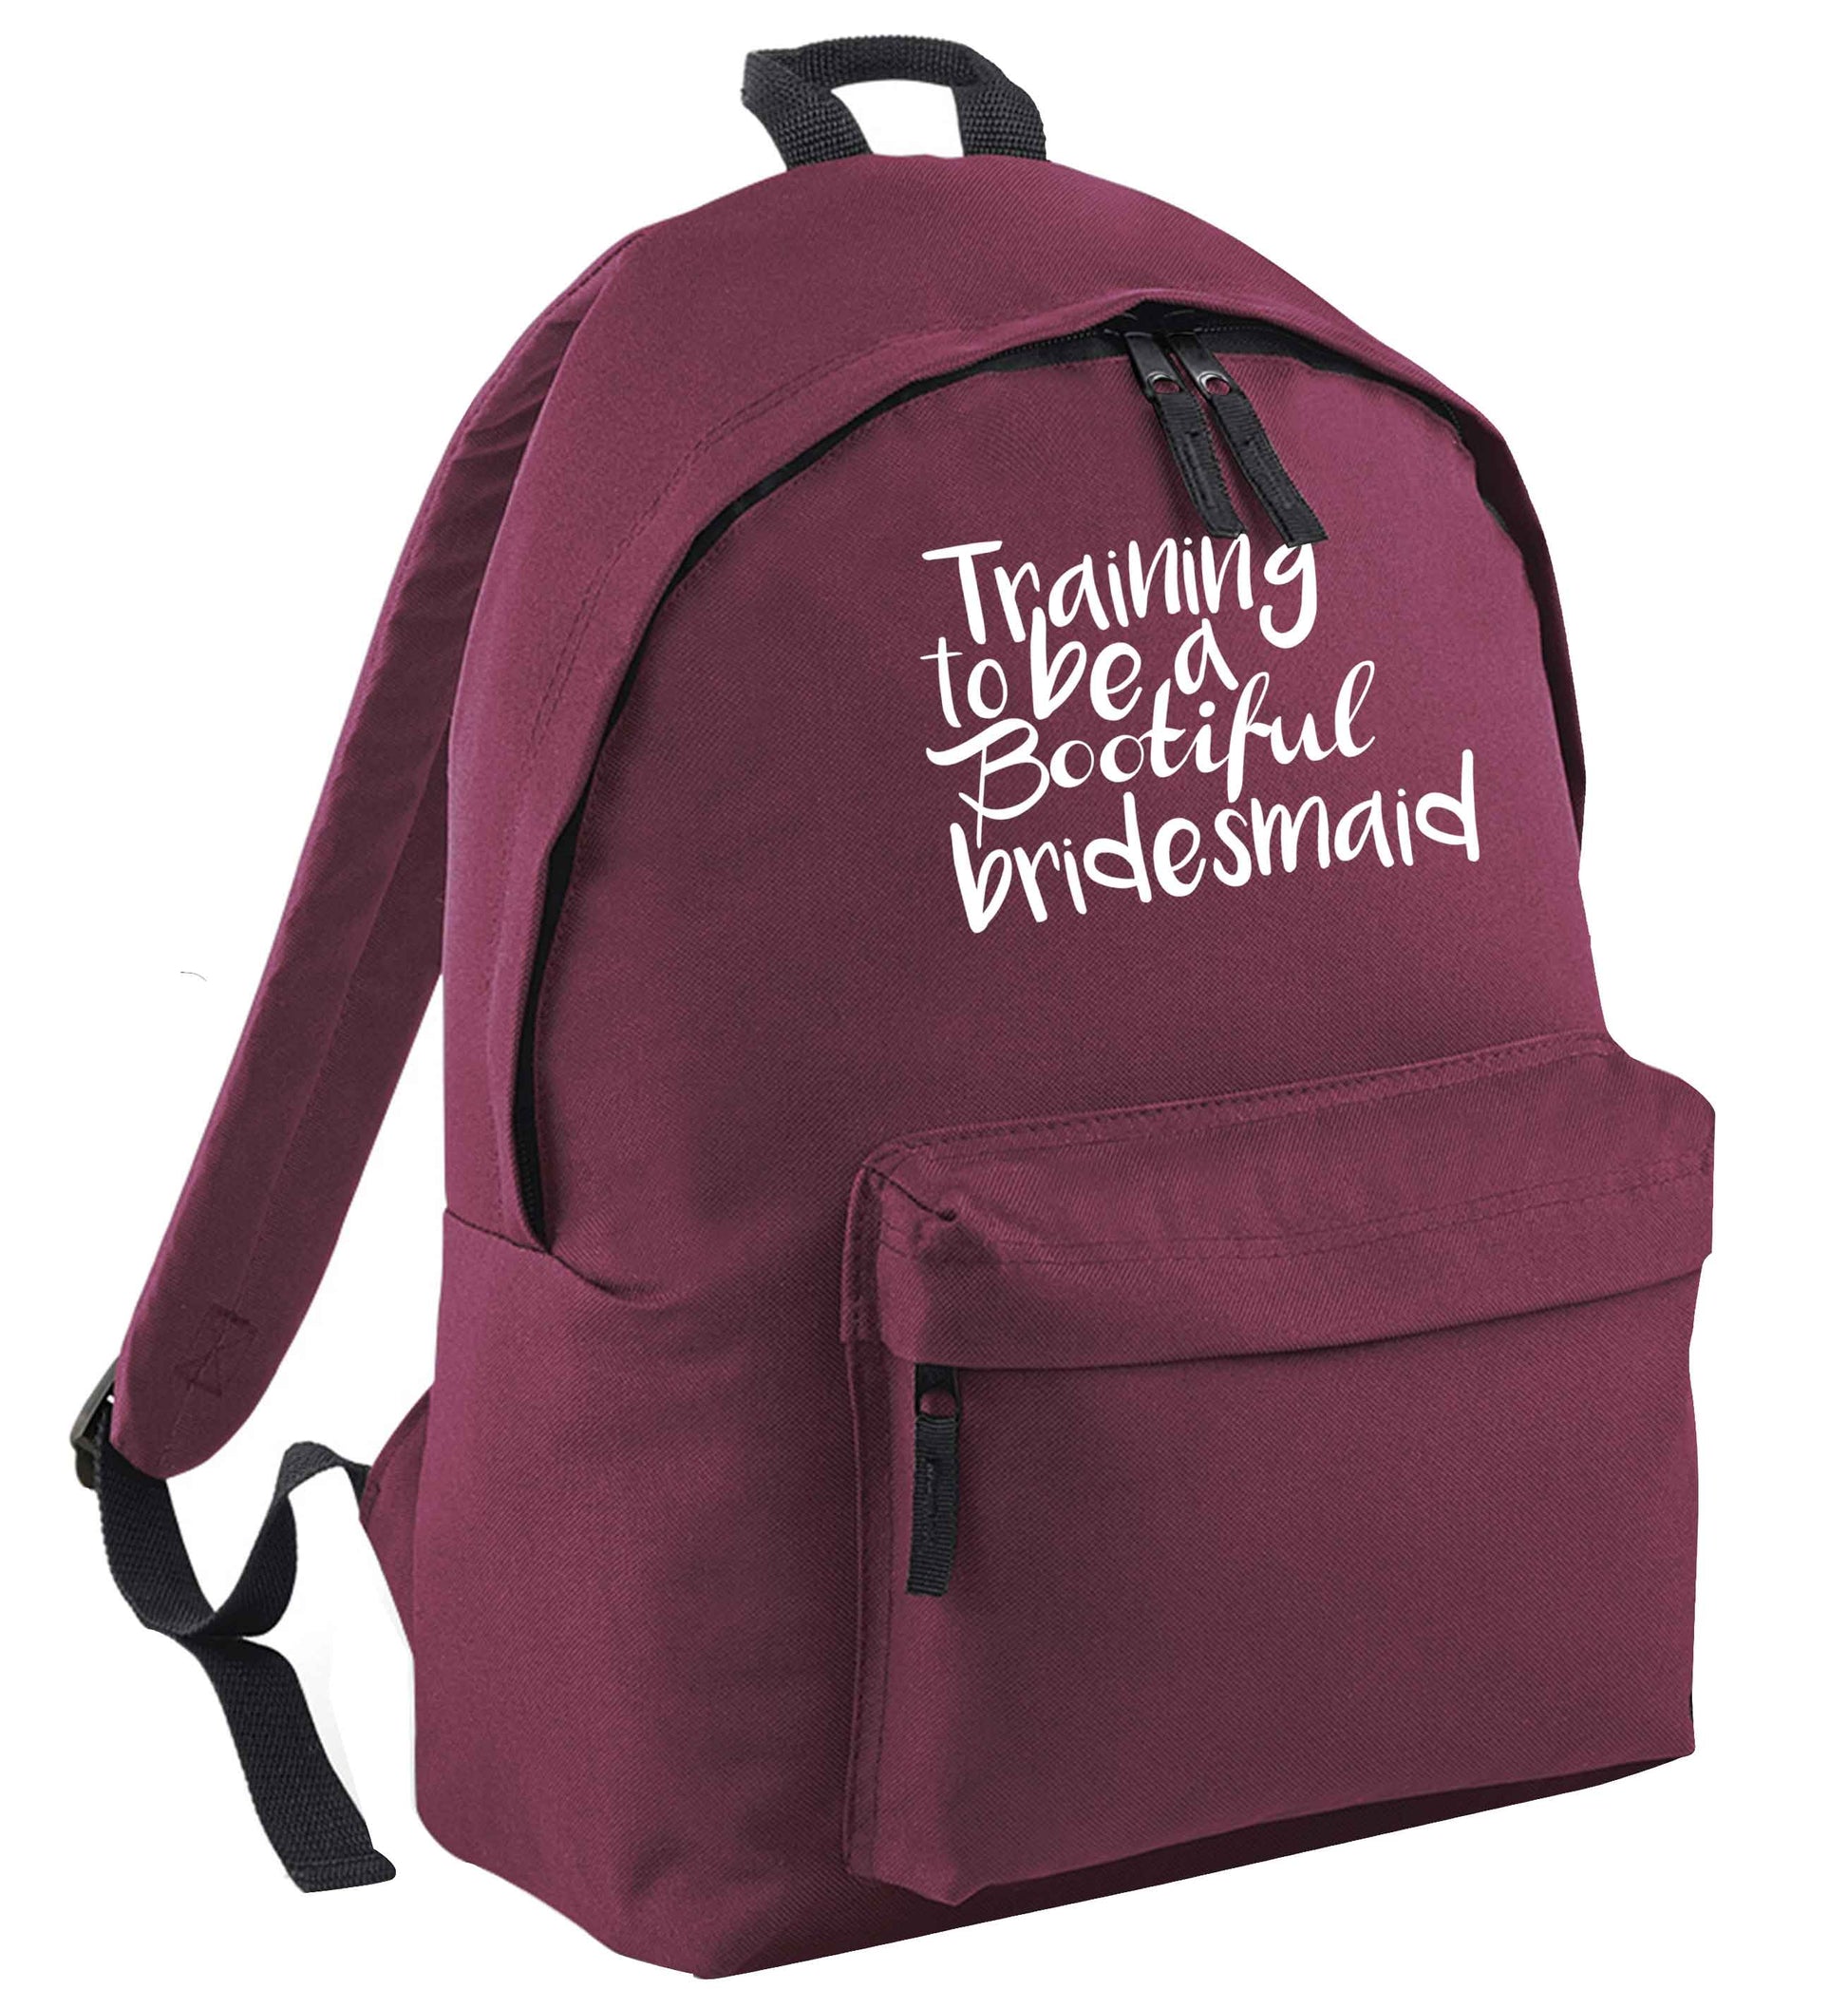 Get motivated and get fit for your big day! Our workout quotes and designs will get you ready to sweat! Perfect for any bride, groom or bridesmaid to be!  maroon adults backpack